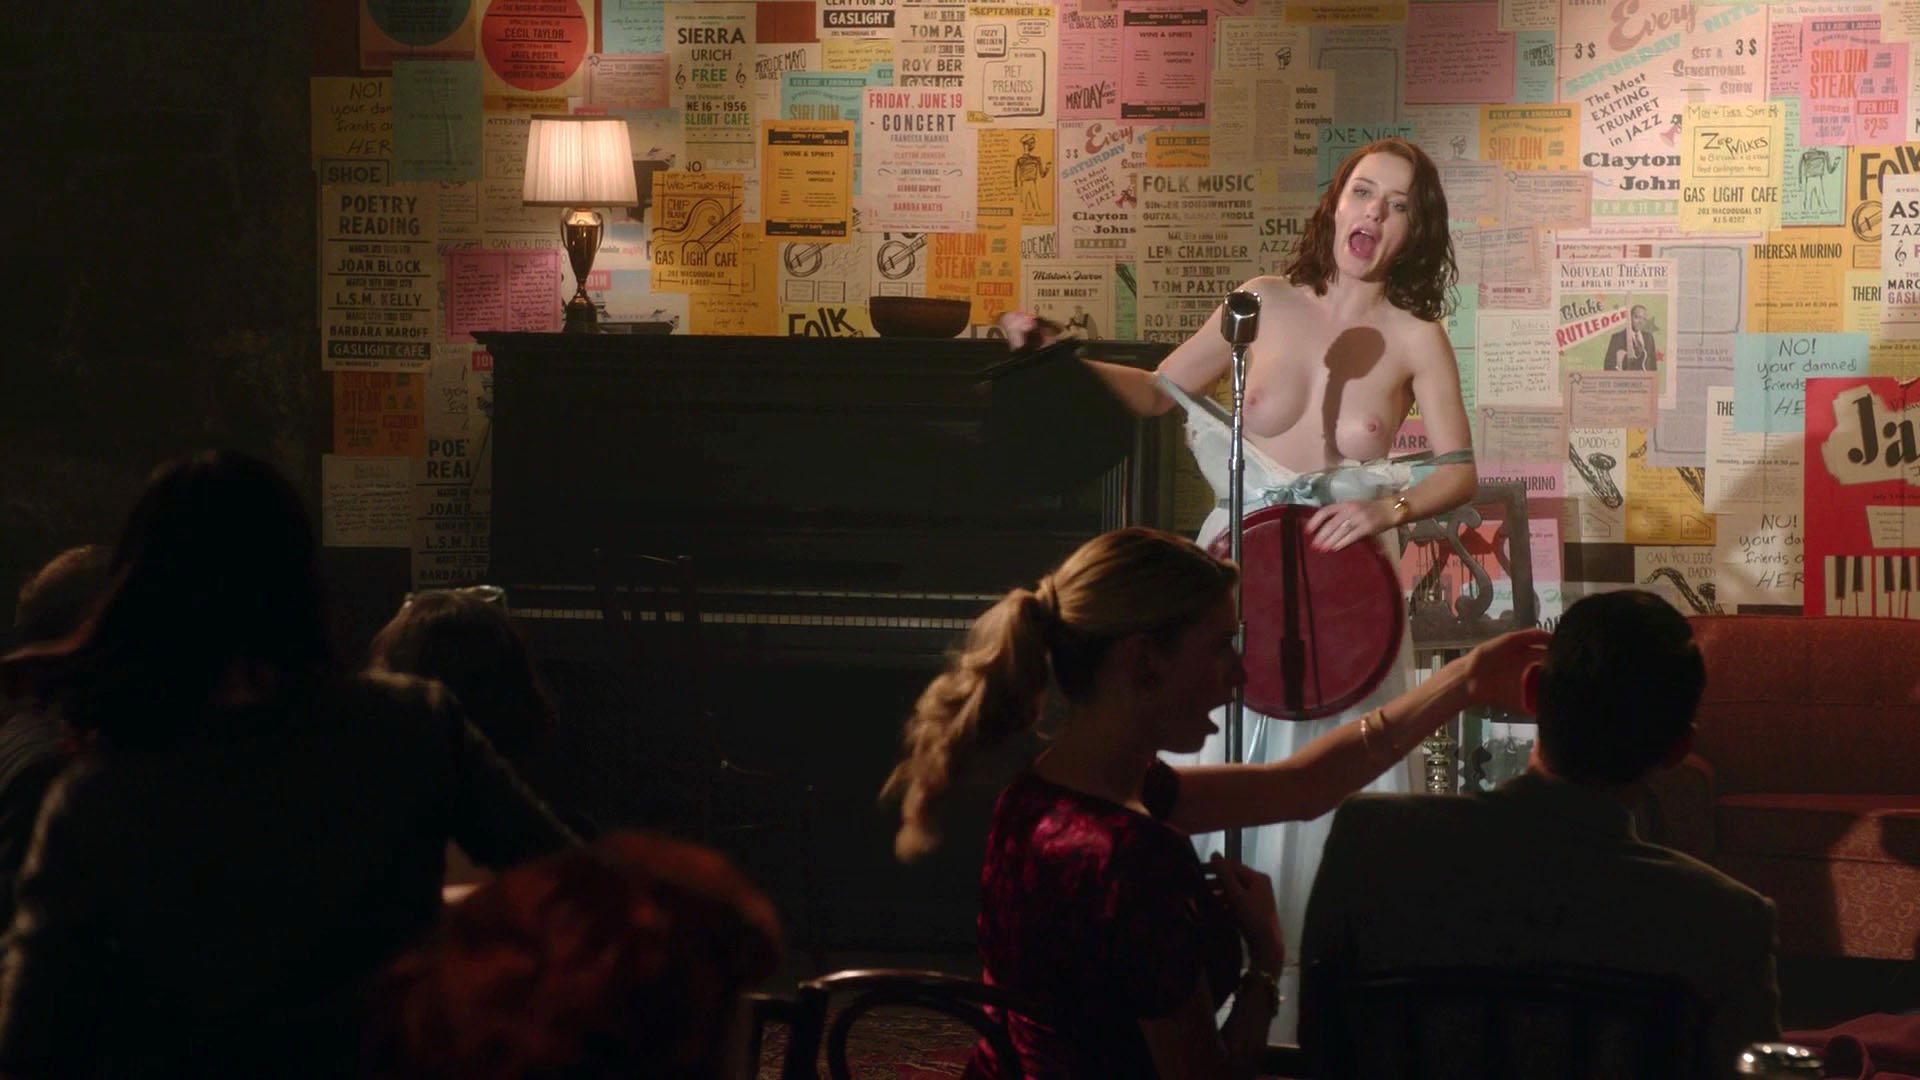 Mrs. maisel topless